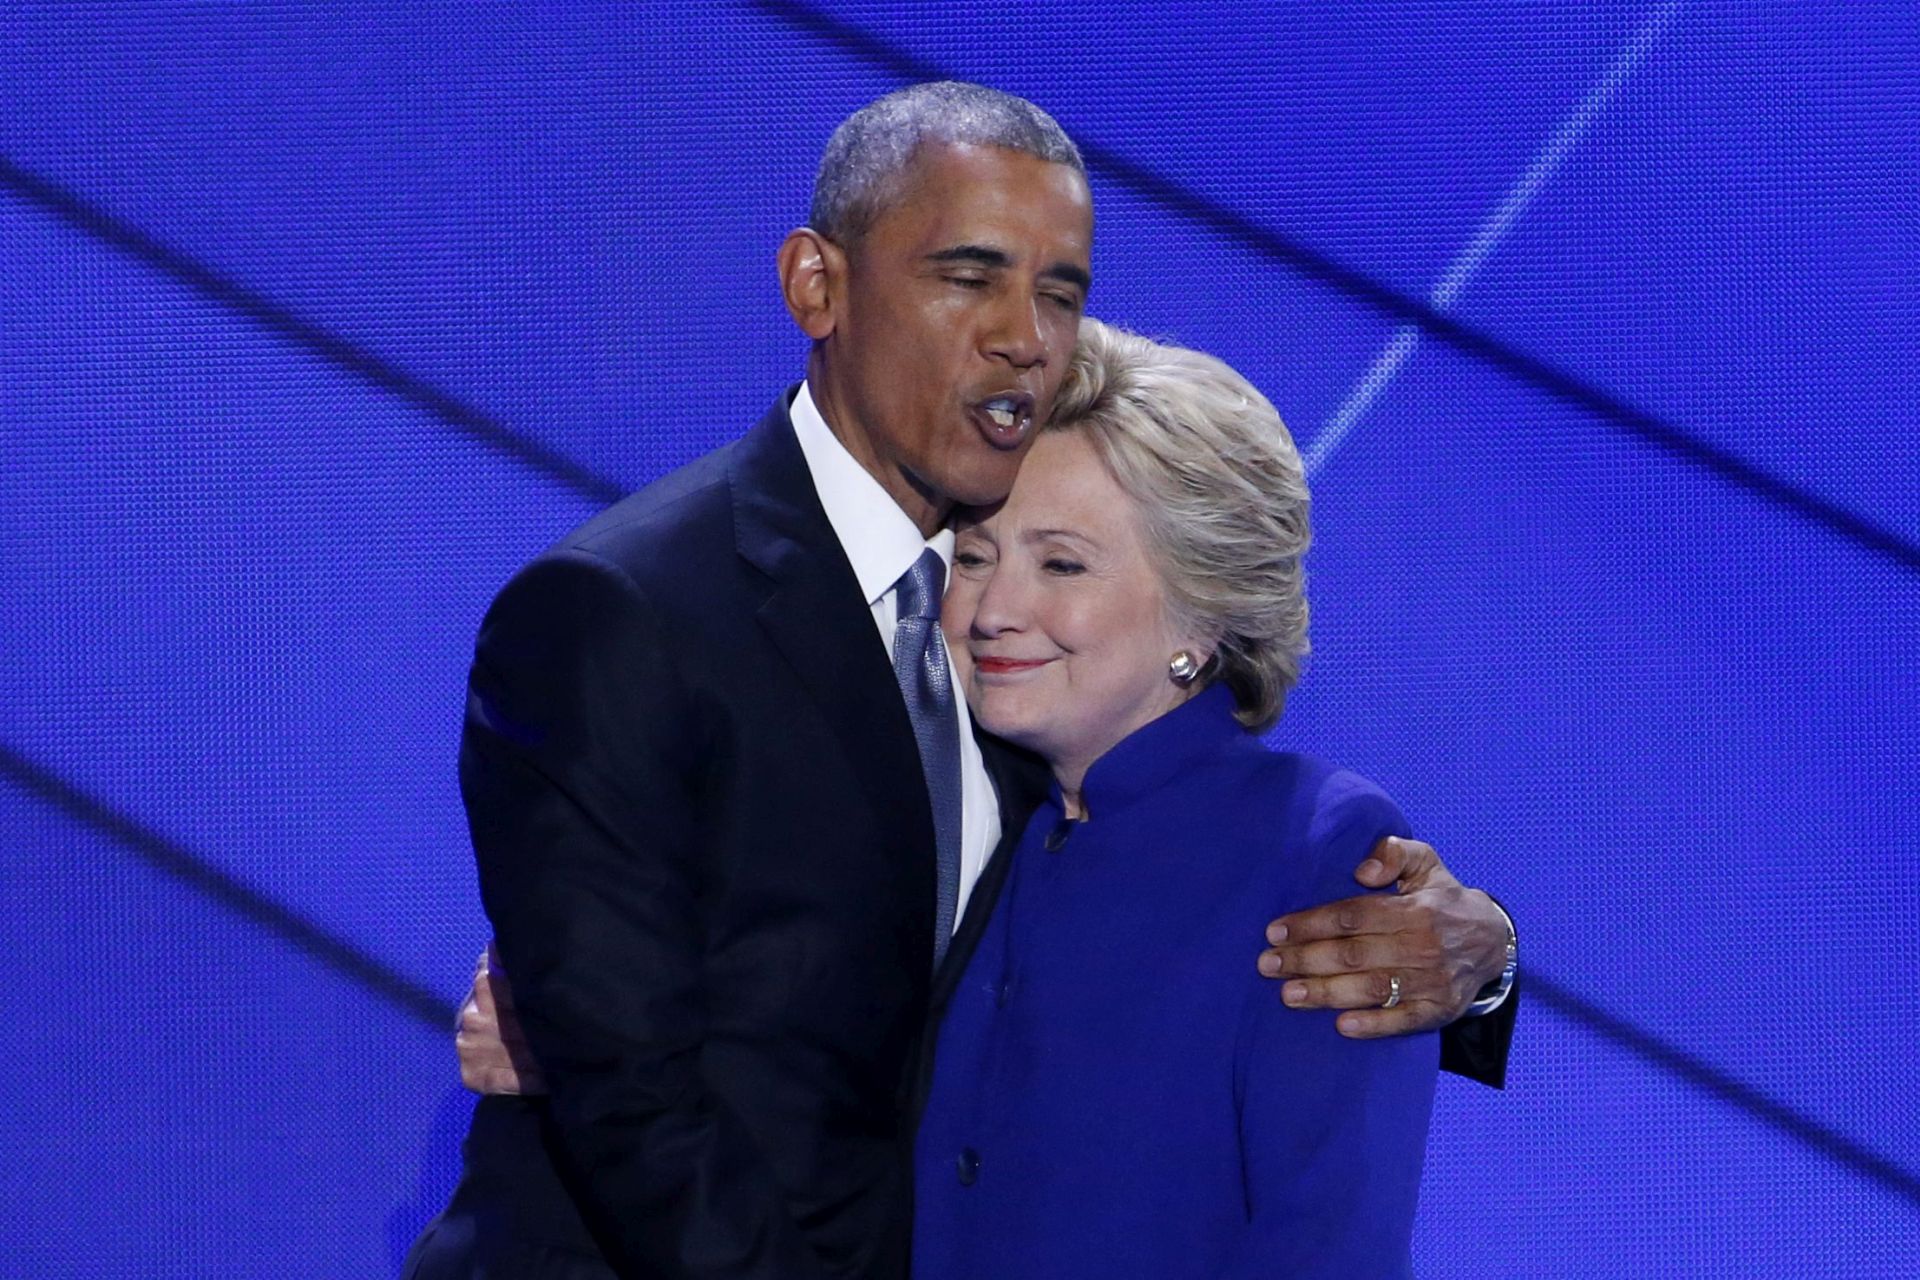 epa05444882 US President Barack Obama (L) hugs Democratic nominee for President Hillary Clinton (R) on stage on the third day of the Democratic National Convention at the Wells Fargo Center in Philadelphia, Pennsylvania, USA, 27 July 2016. The four-day convention is expected to end with Hillary Clinton formally accepting the nomination of the Democratic Party as their presidential candidate in the 2016 election.  EPA/SHAWN THEW